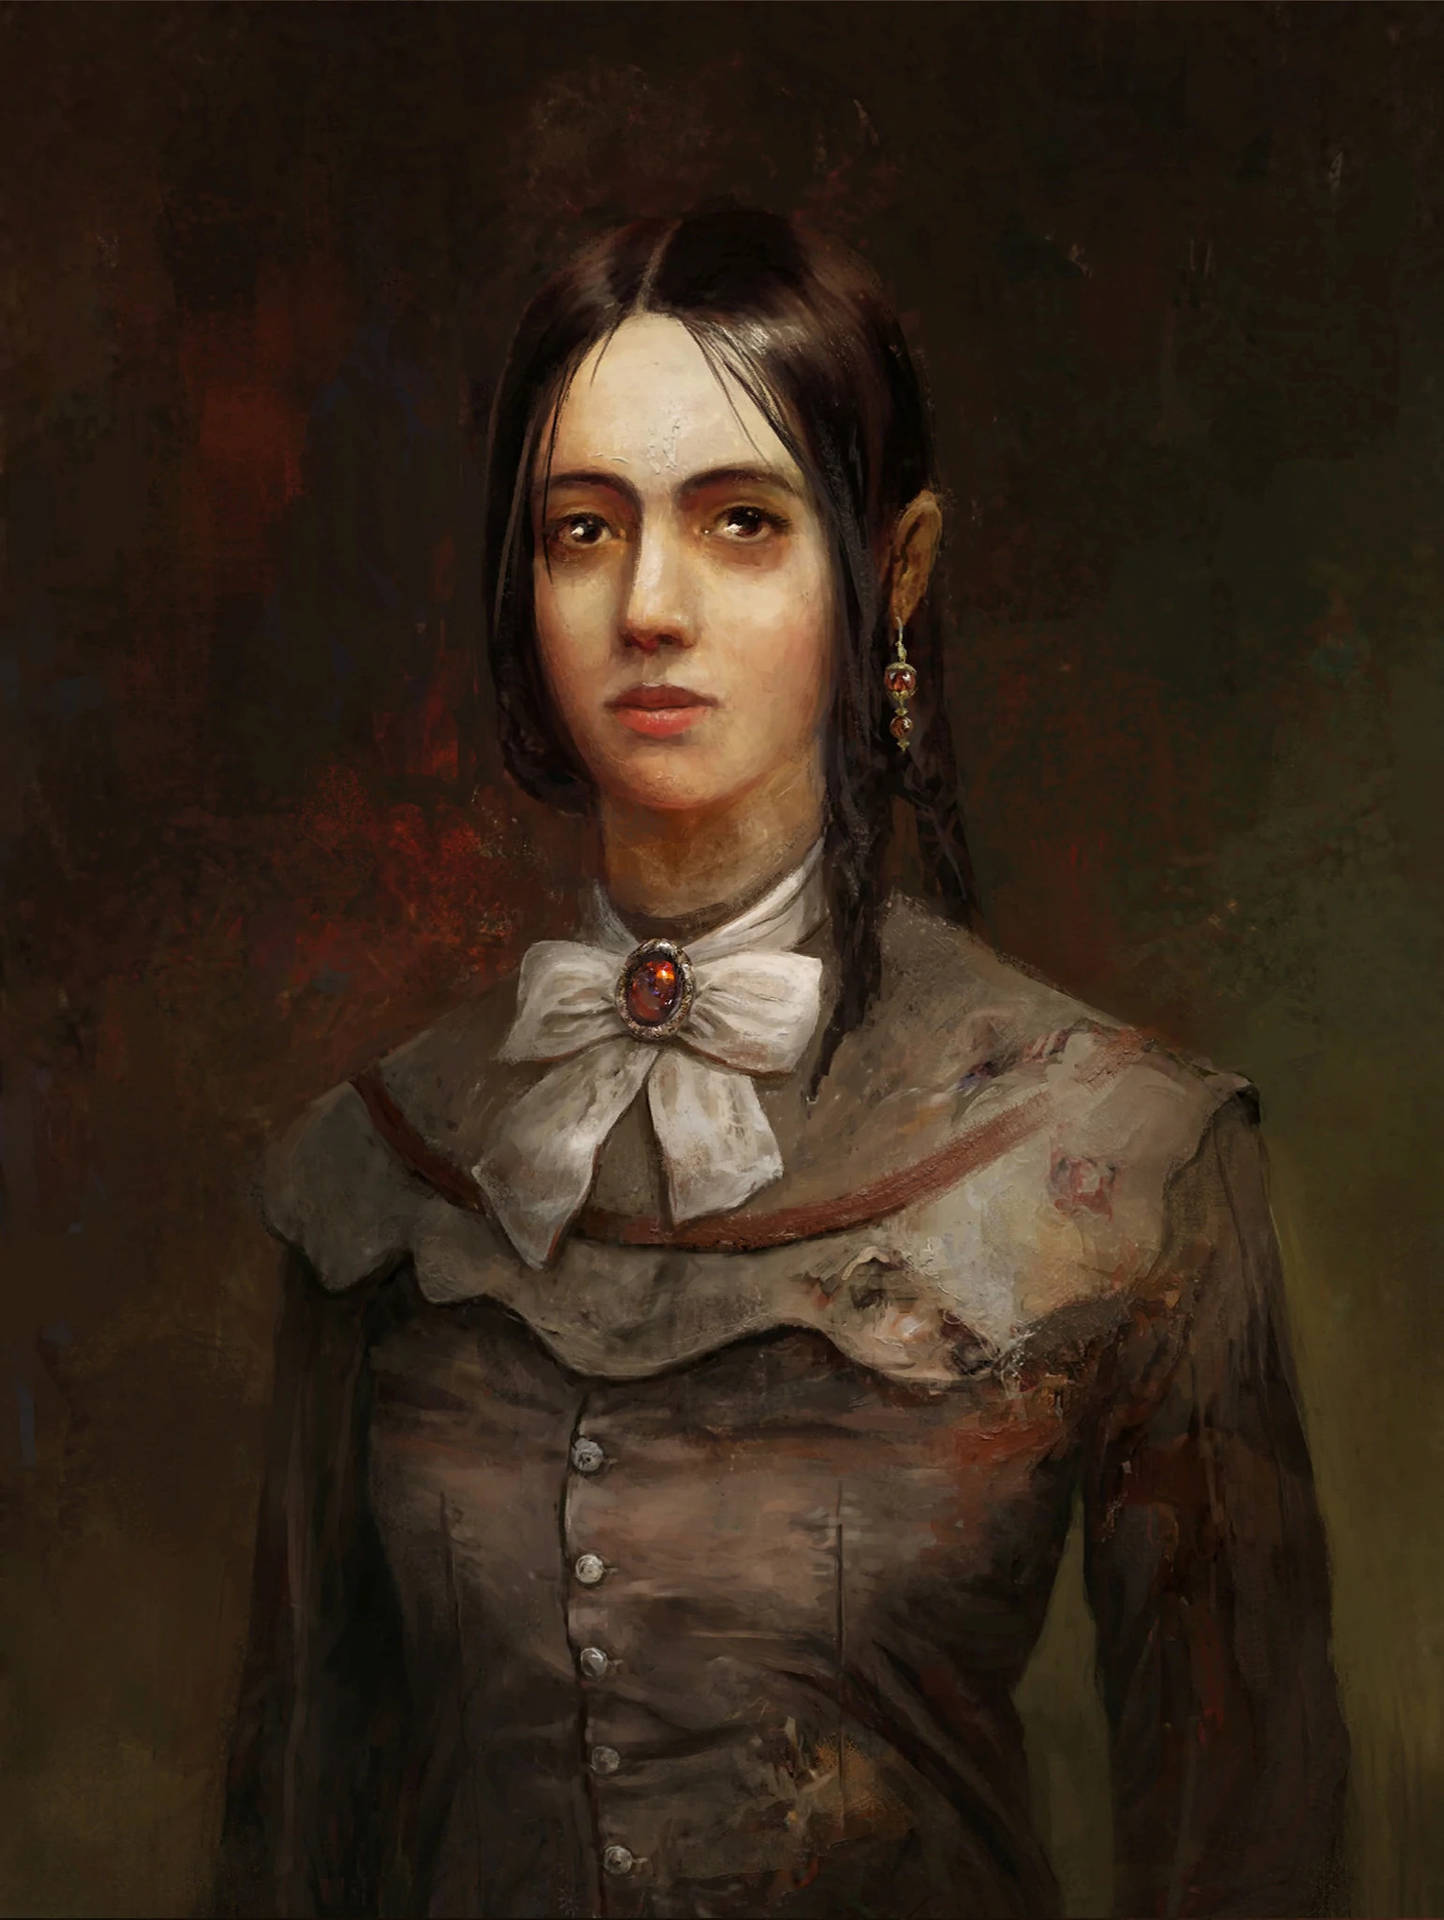 Caption: The Haunting Beauty In Layers Of Fear: 'the Wife'. Background